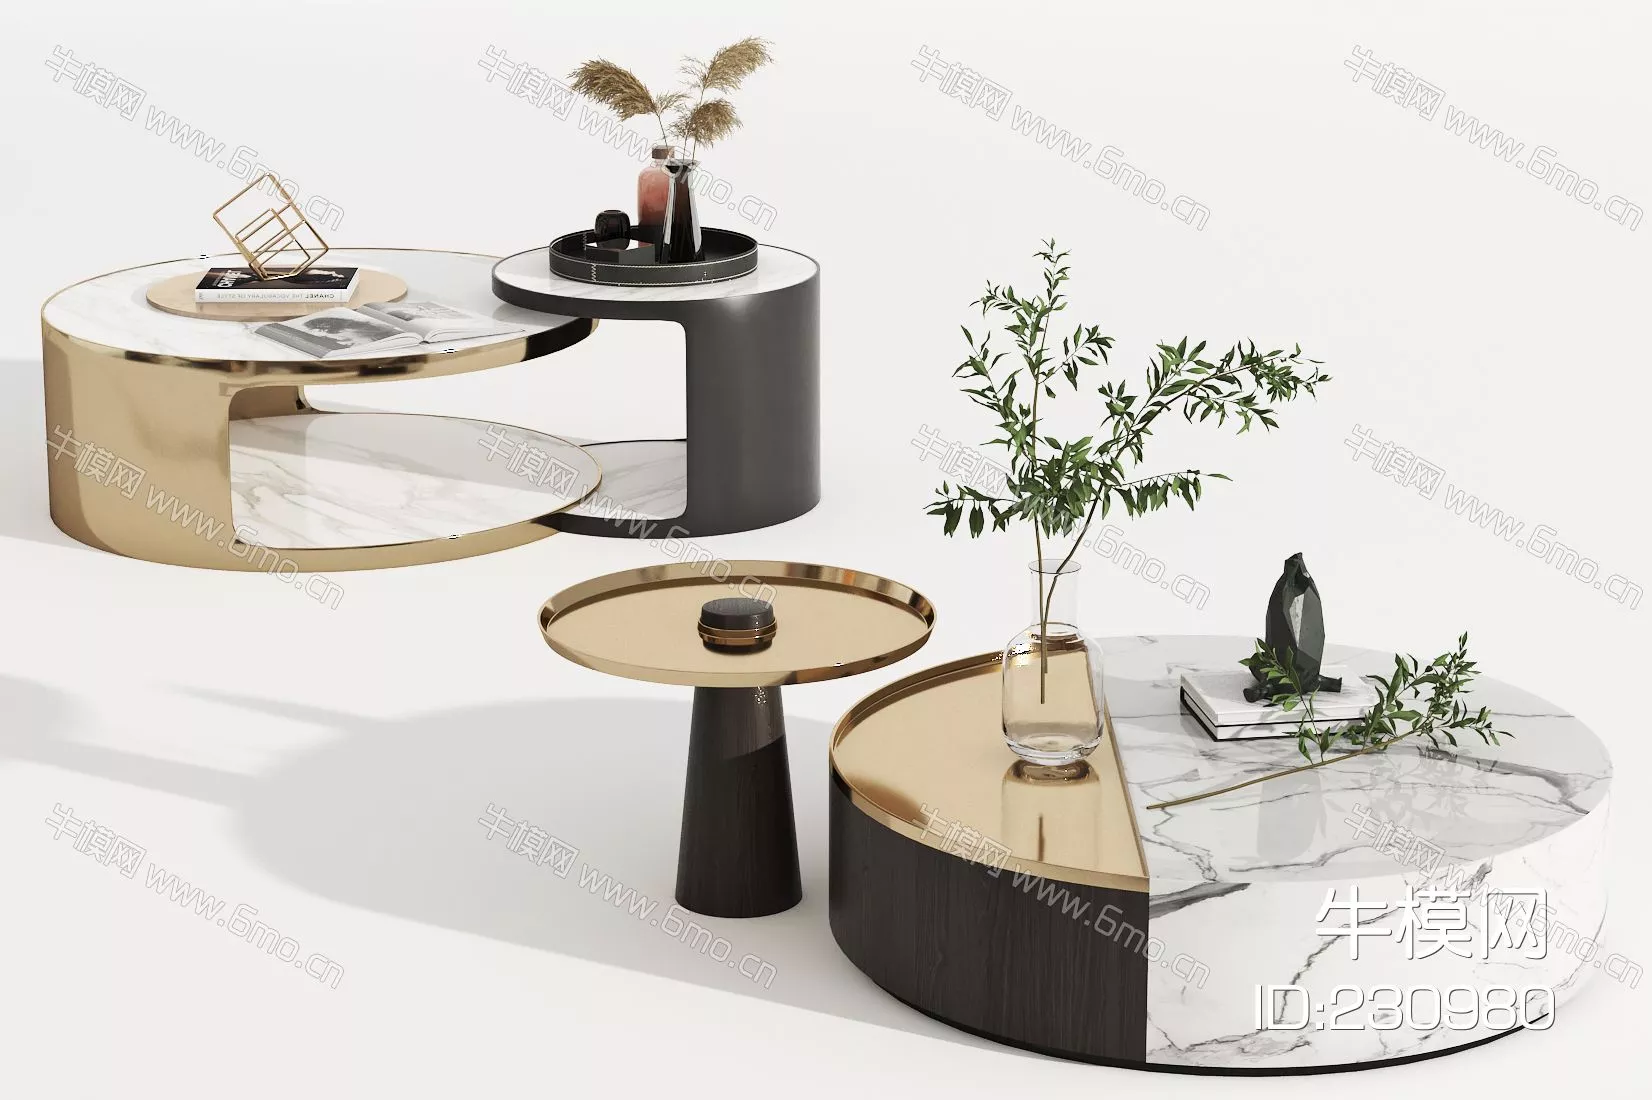 MODERN COFFEE TABLE - SKETCHUP 3D MODEL - VRAY - 230980